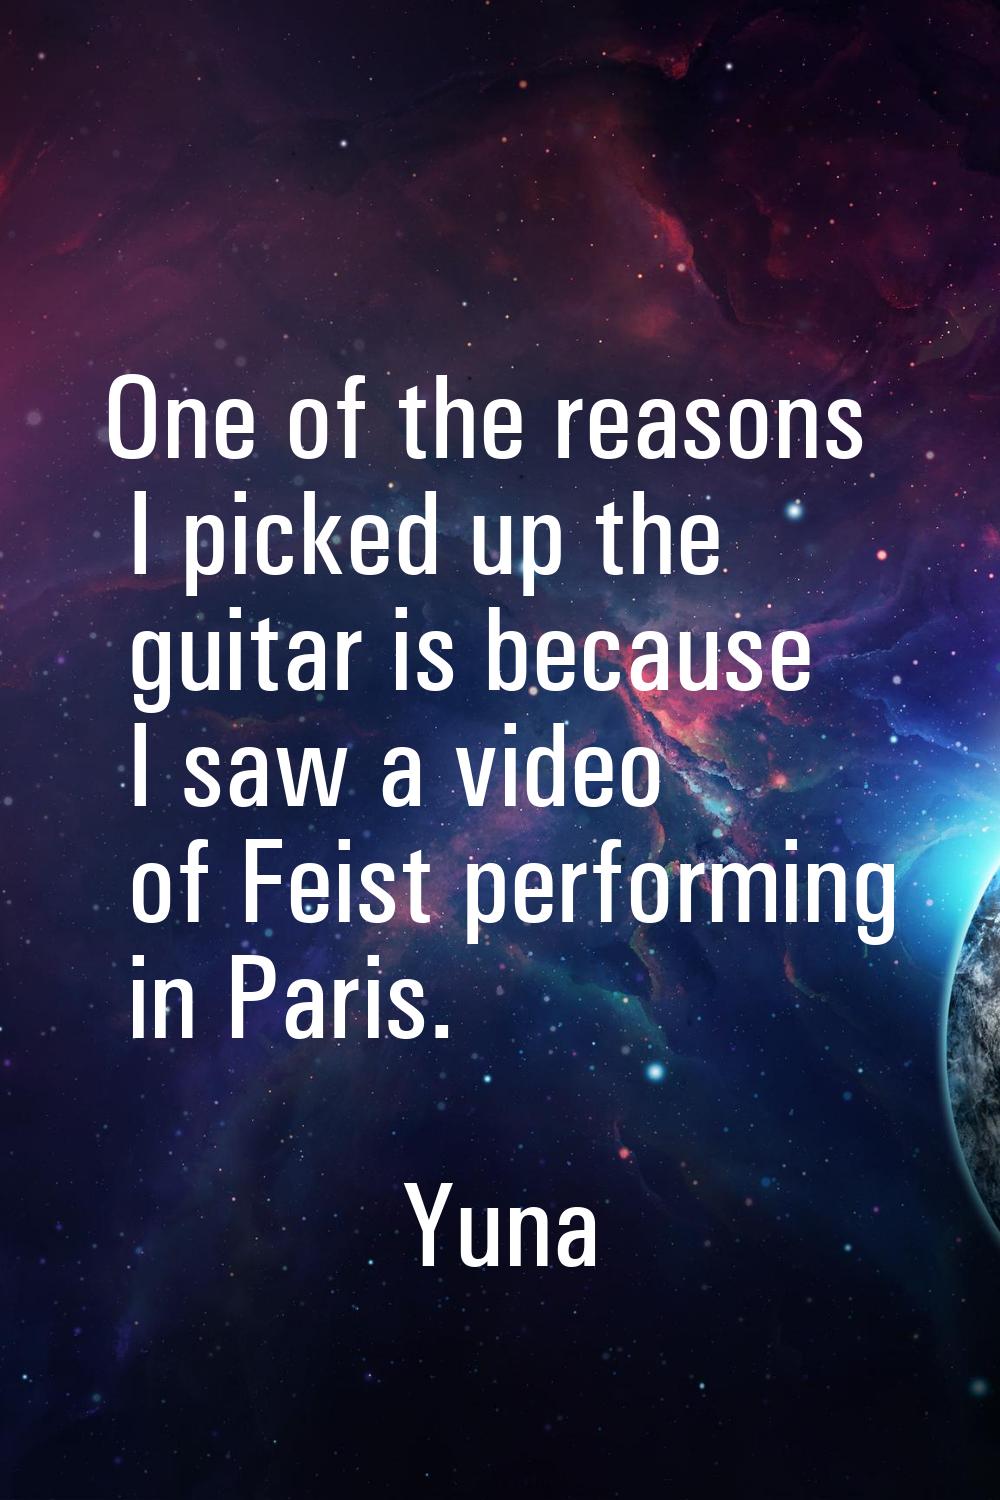 One of the reasons I picked up the guitar is because I saw a video of Feist performing in Paris.